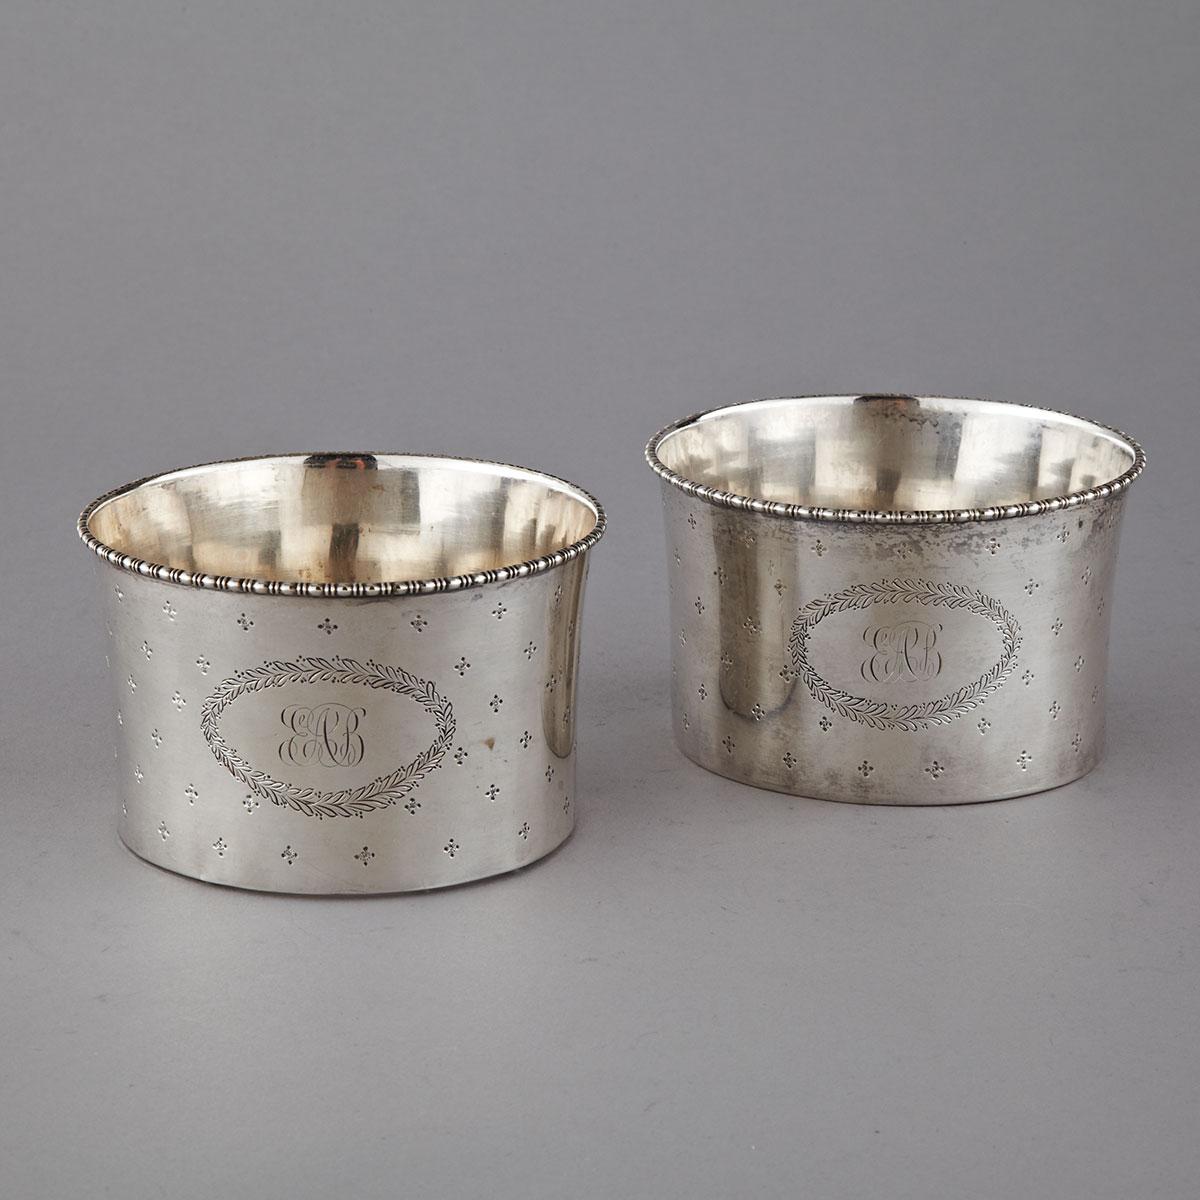 Pair of Canadian Silver Wine Coasters, Henry Birks & Sons, Montreal, Que., c.1901